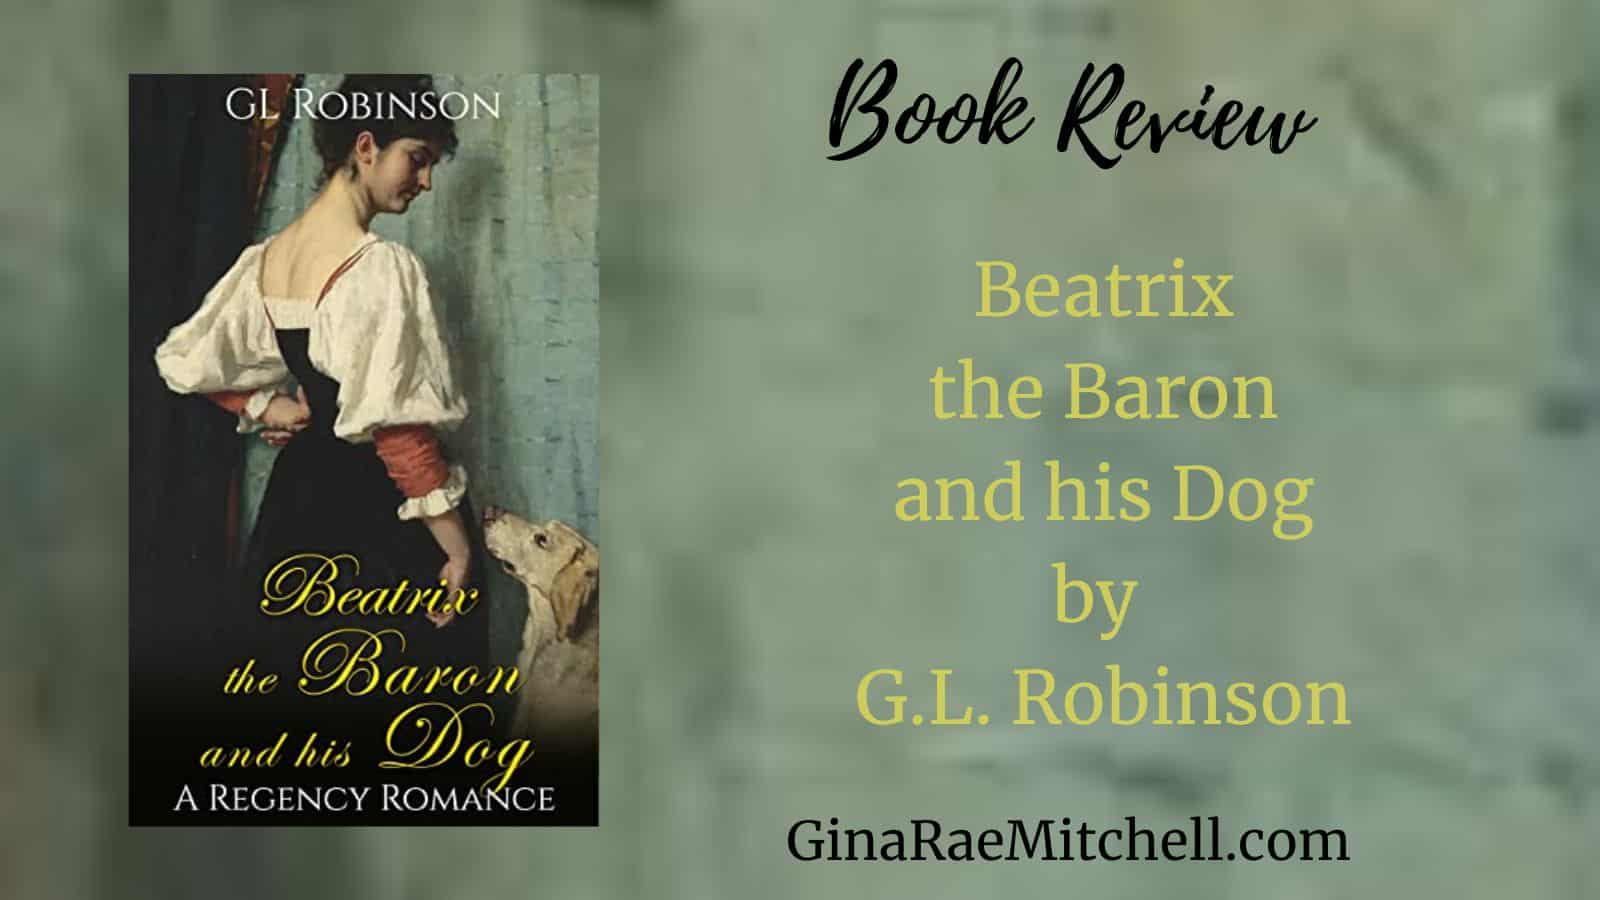 Beatrix, the Baron, and his Dog: A Regency Romance from GL Robinson | Book Review